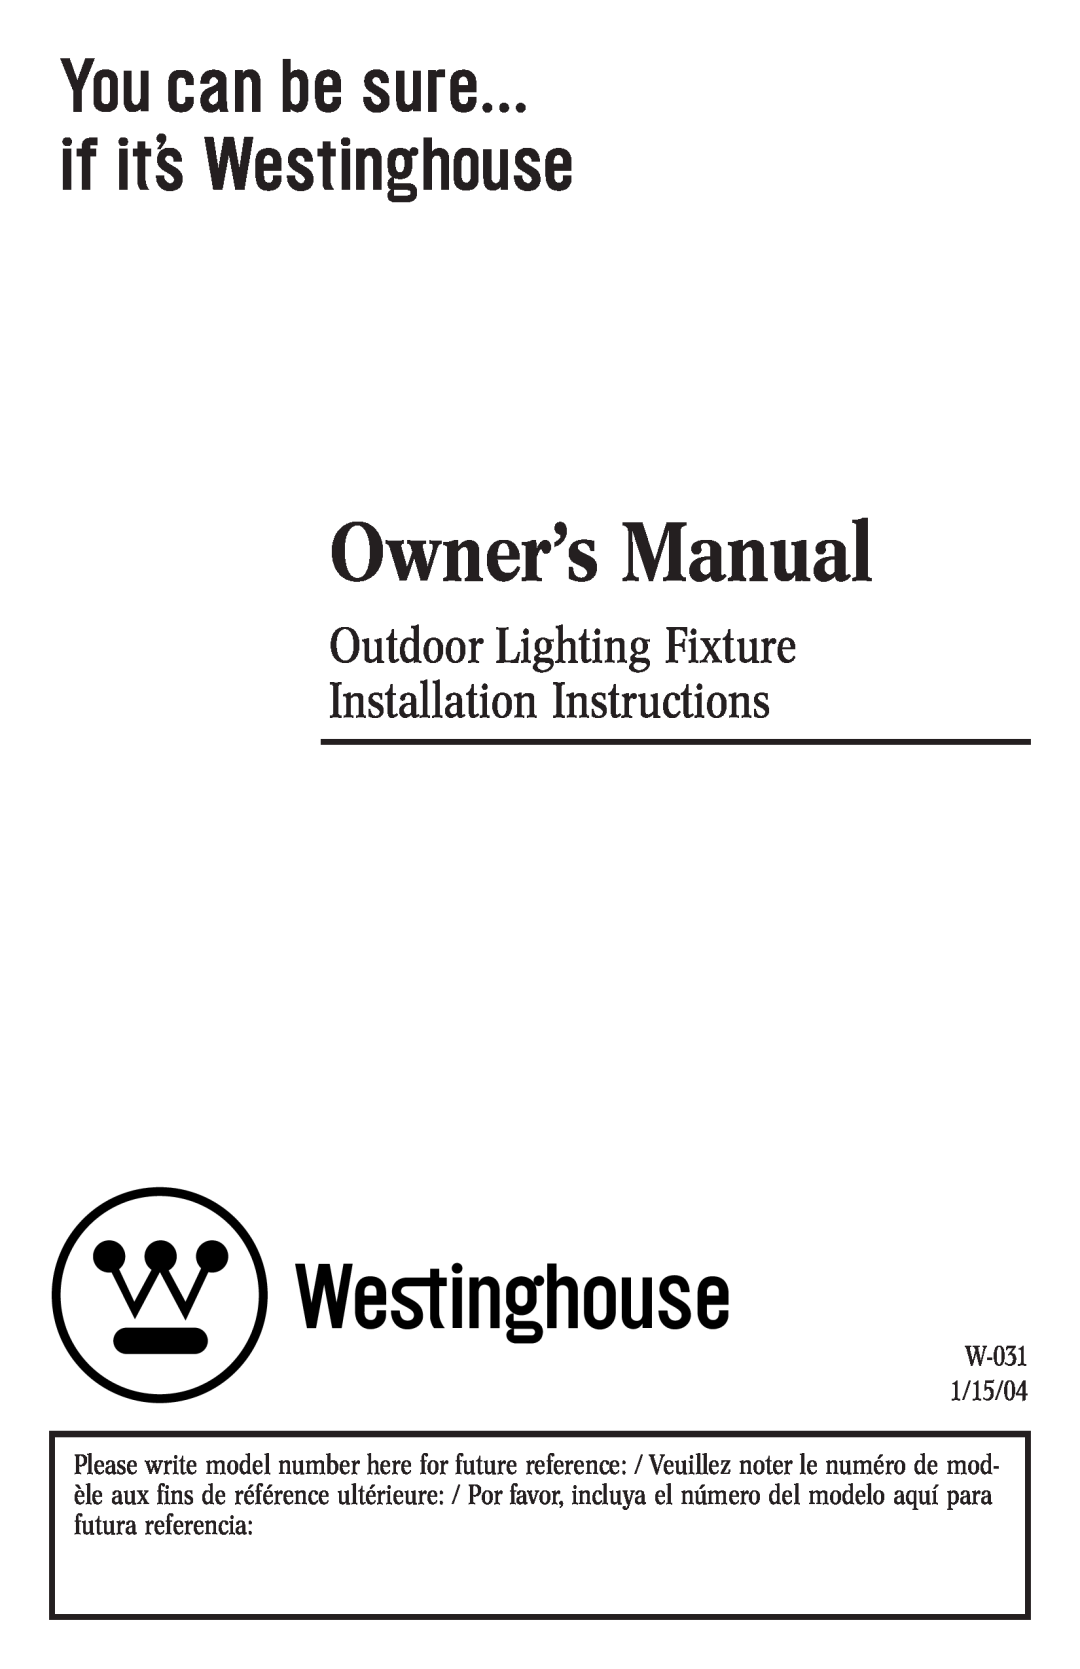 Westinghouse w-031 owner manual Outdoor Lighting Fixture, Installation Instructions 